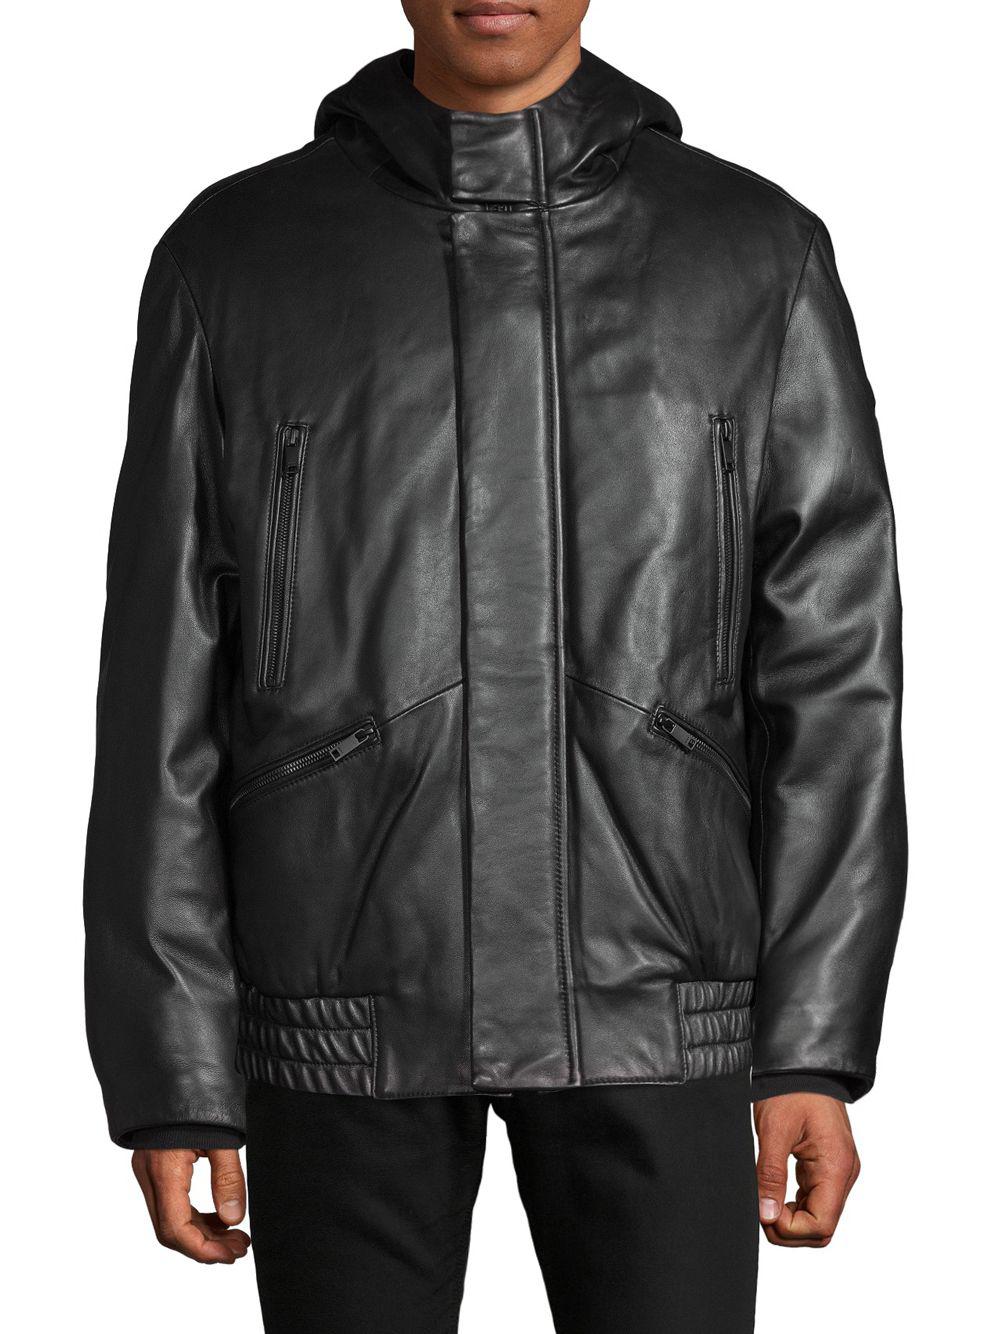 DKNY Hooded Leather Jacket in Black for Men - Lyst